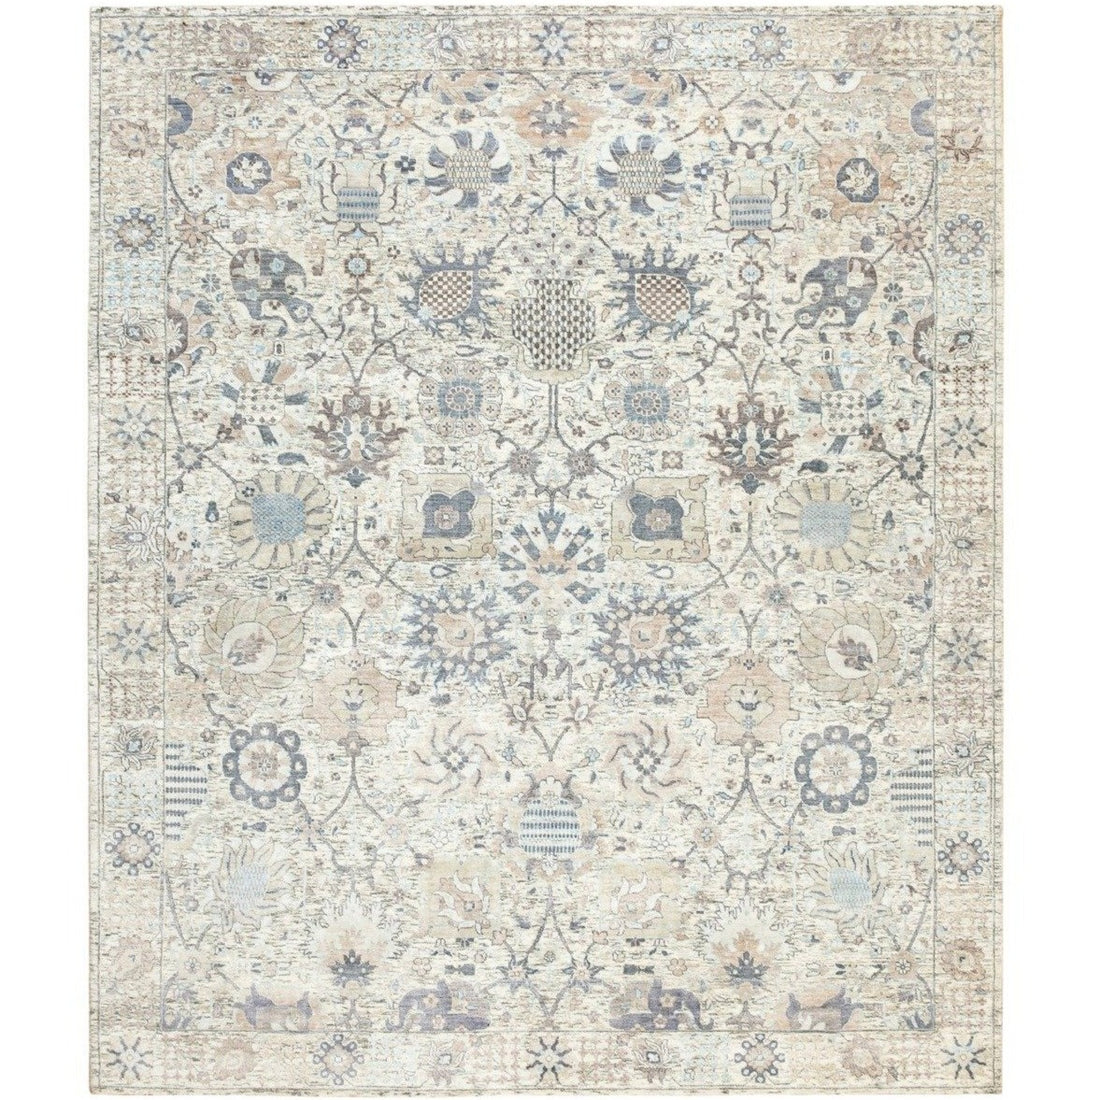 8'0"x10'0" | Ivory Transitional Rug | Wool and Silk | 21310